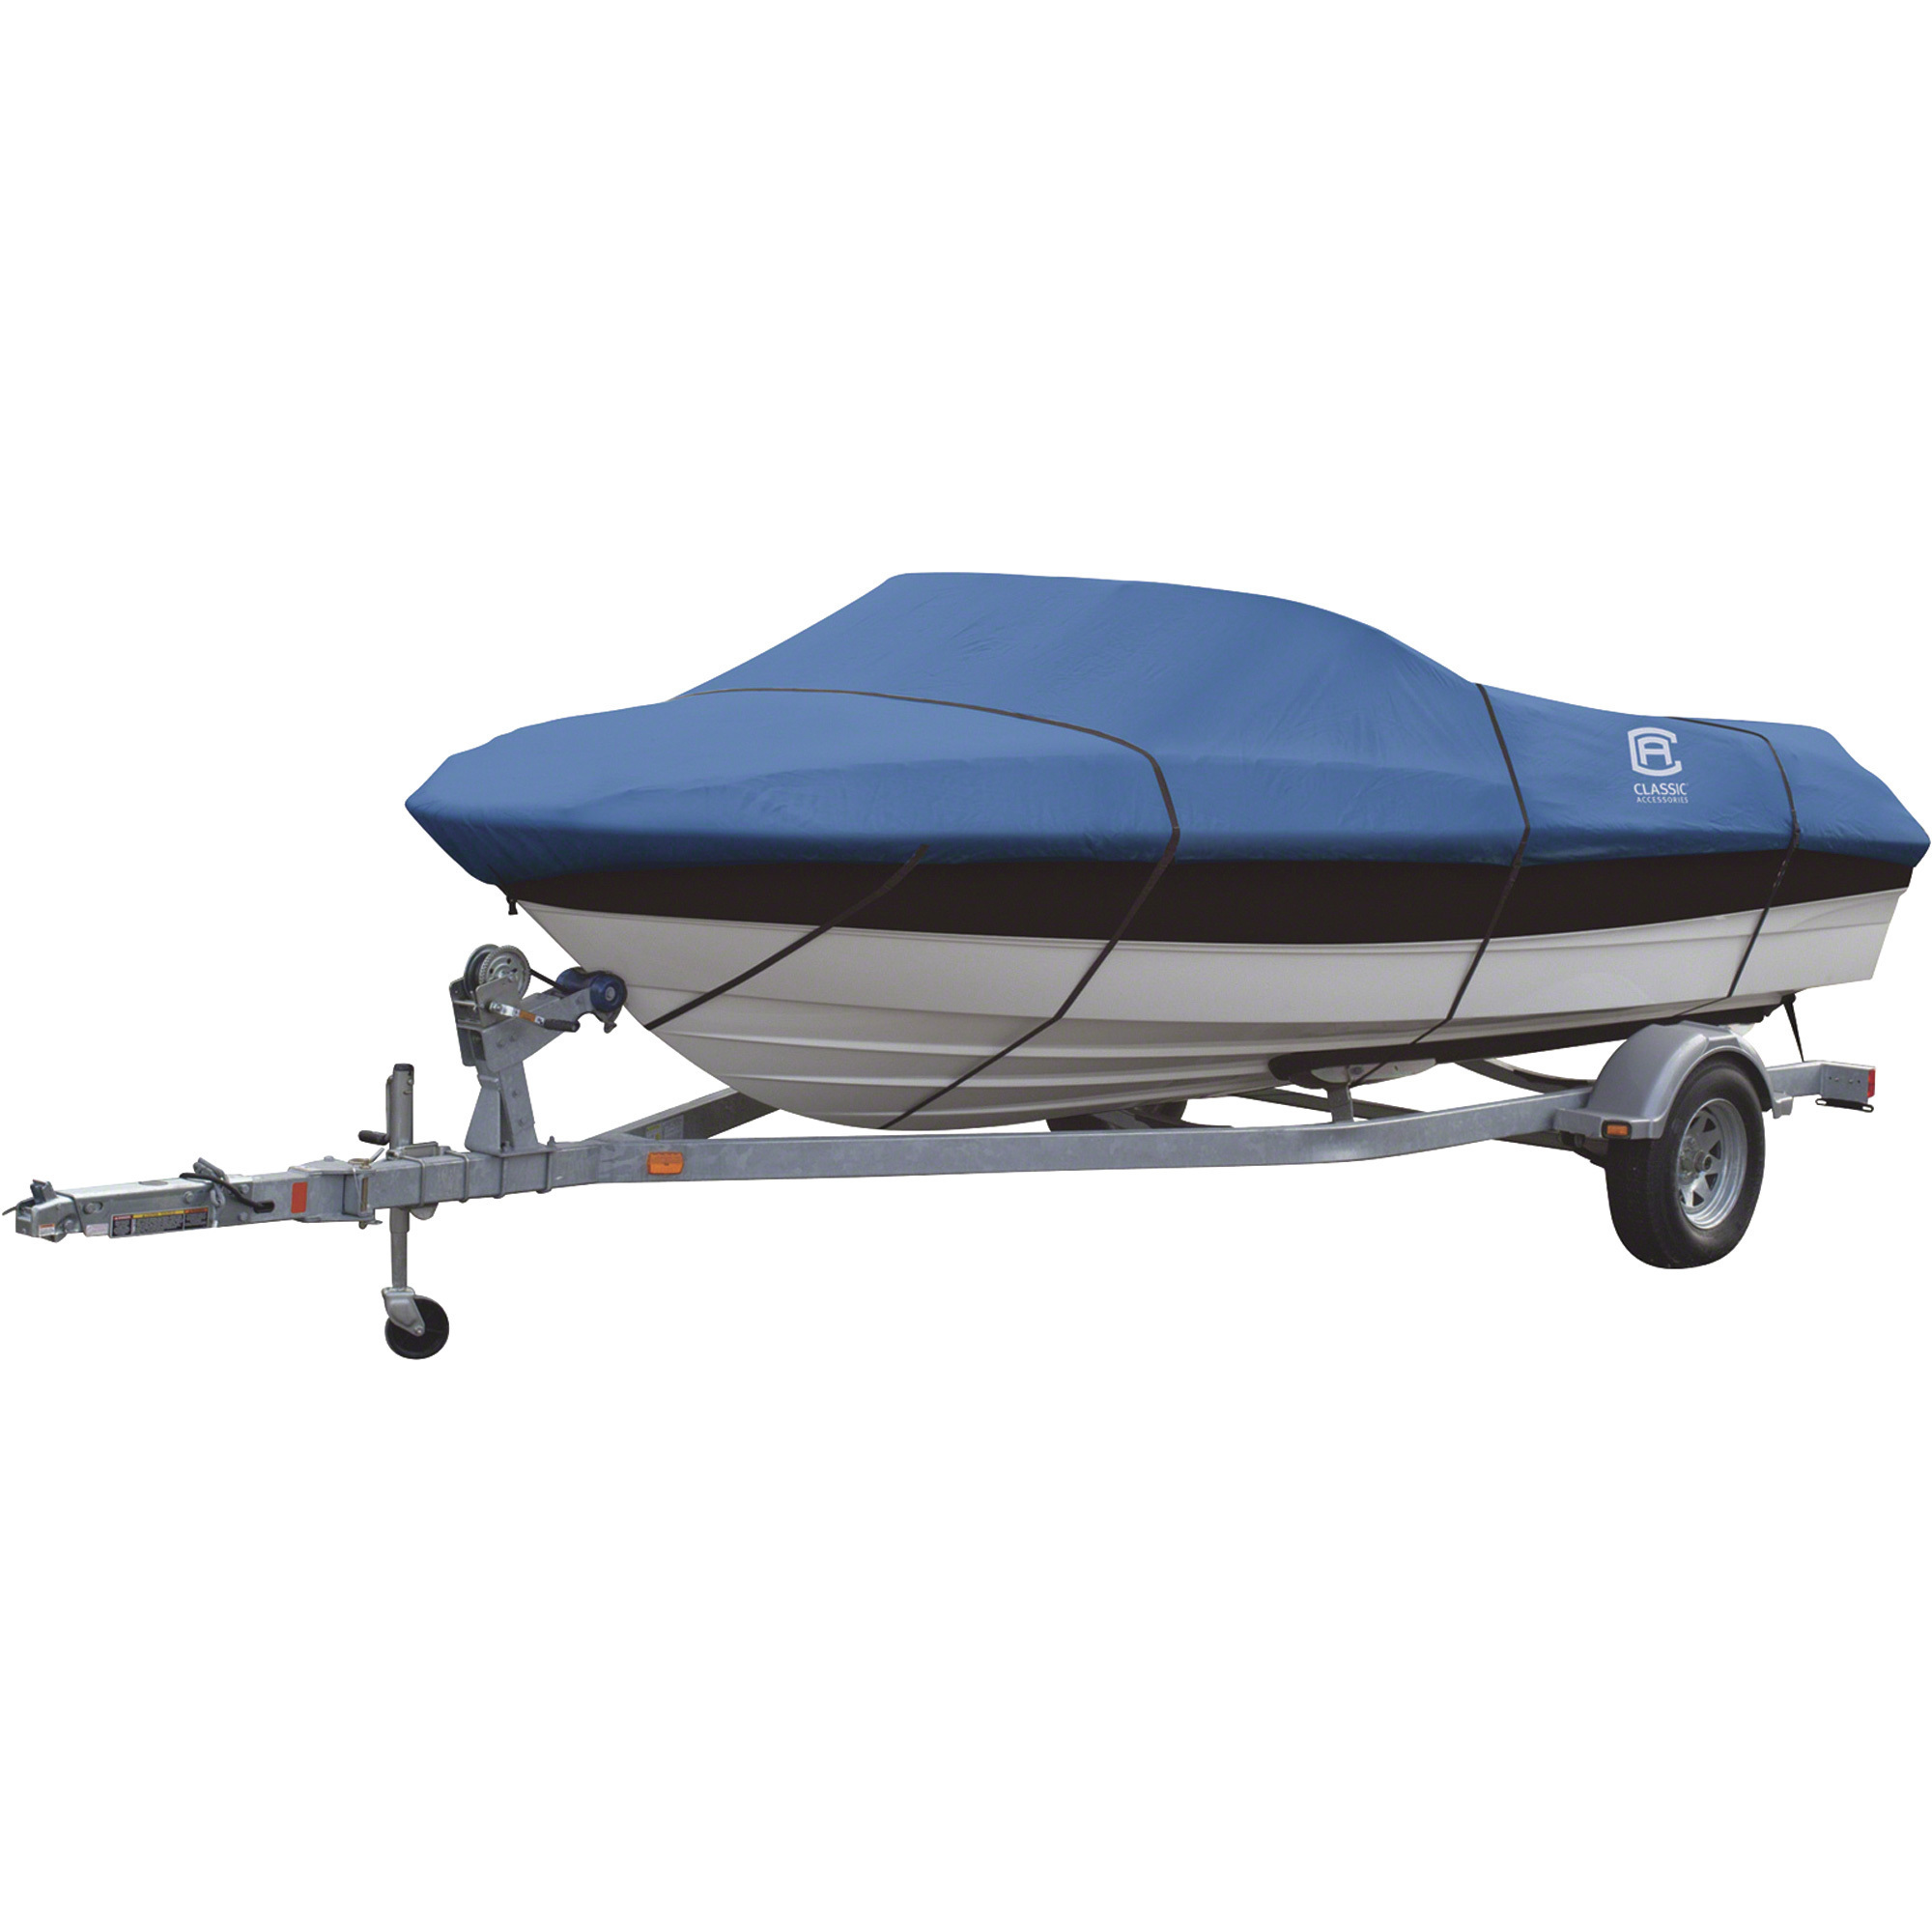 Classic Accessories Stellex All Season Boat Cover, Blue, Fits 17ft.-19ft. x 102Inch W, Model 20-148-110501-00